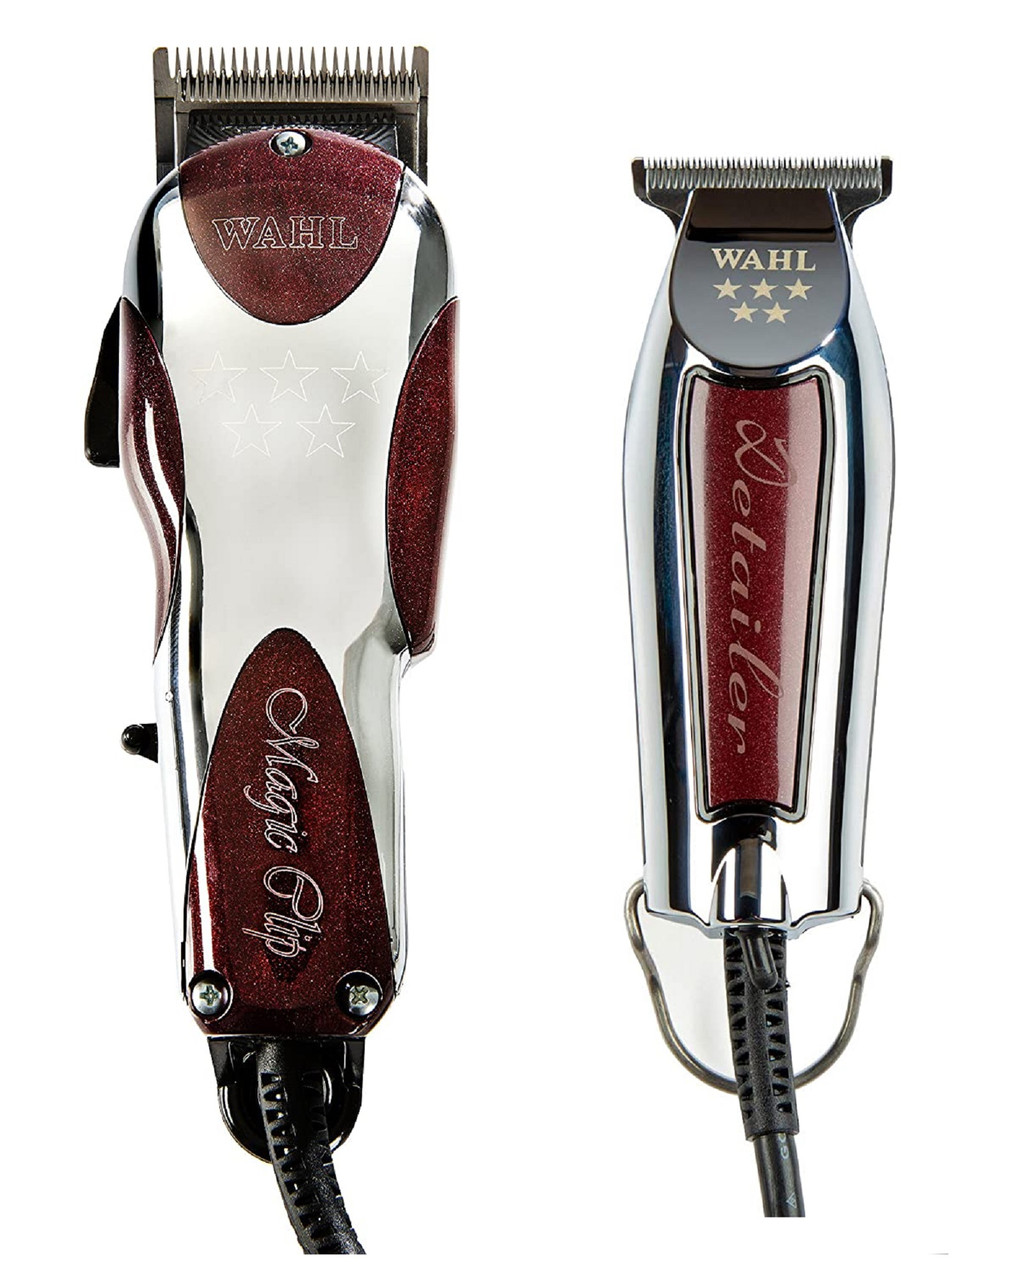 Wahl, Grooming, Magic Clips